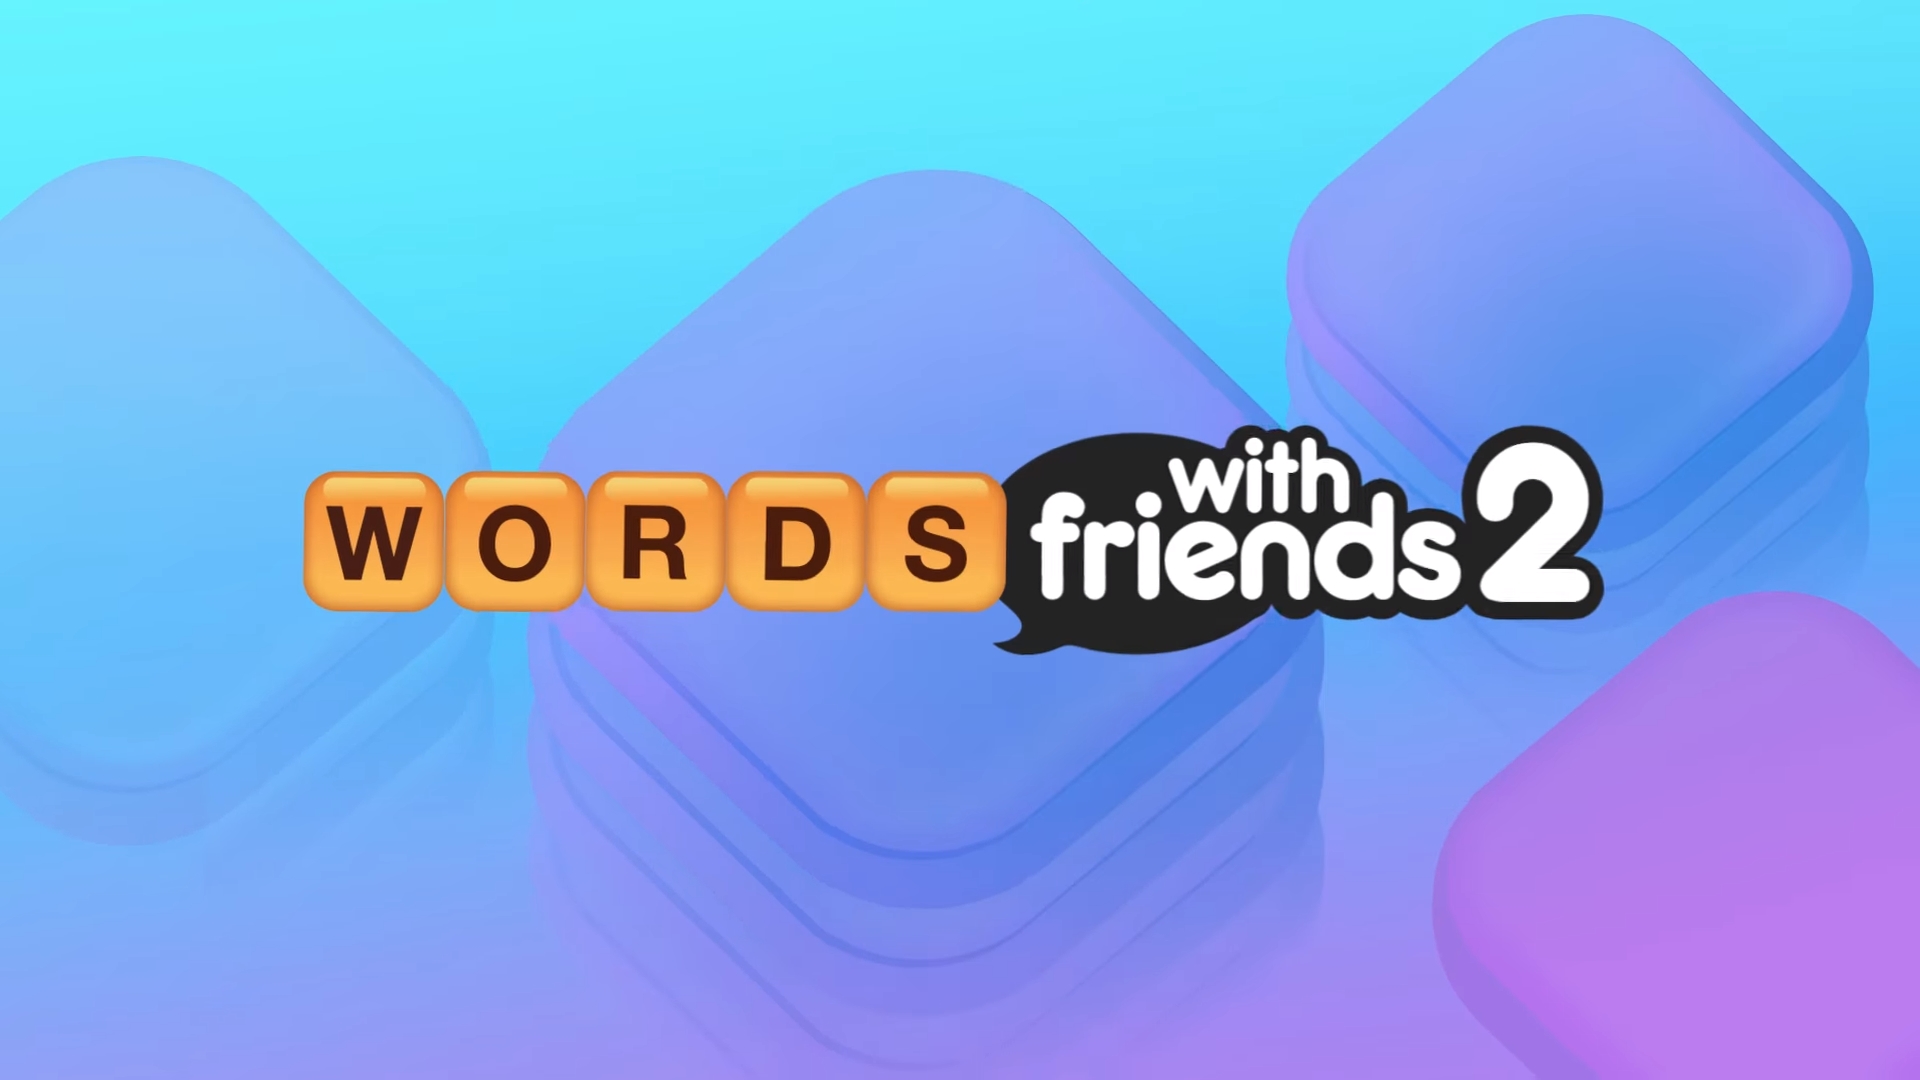 Френд 2. Words with friends. Words with friends 2. Words with friends 2 Word game. Friends 2 казино.